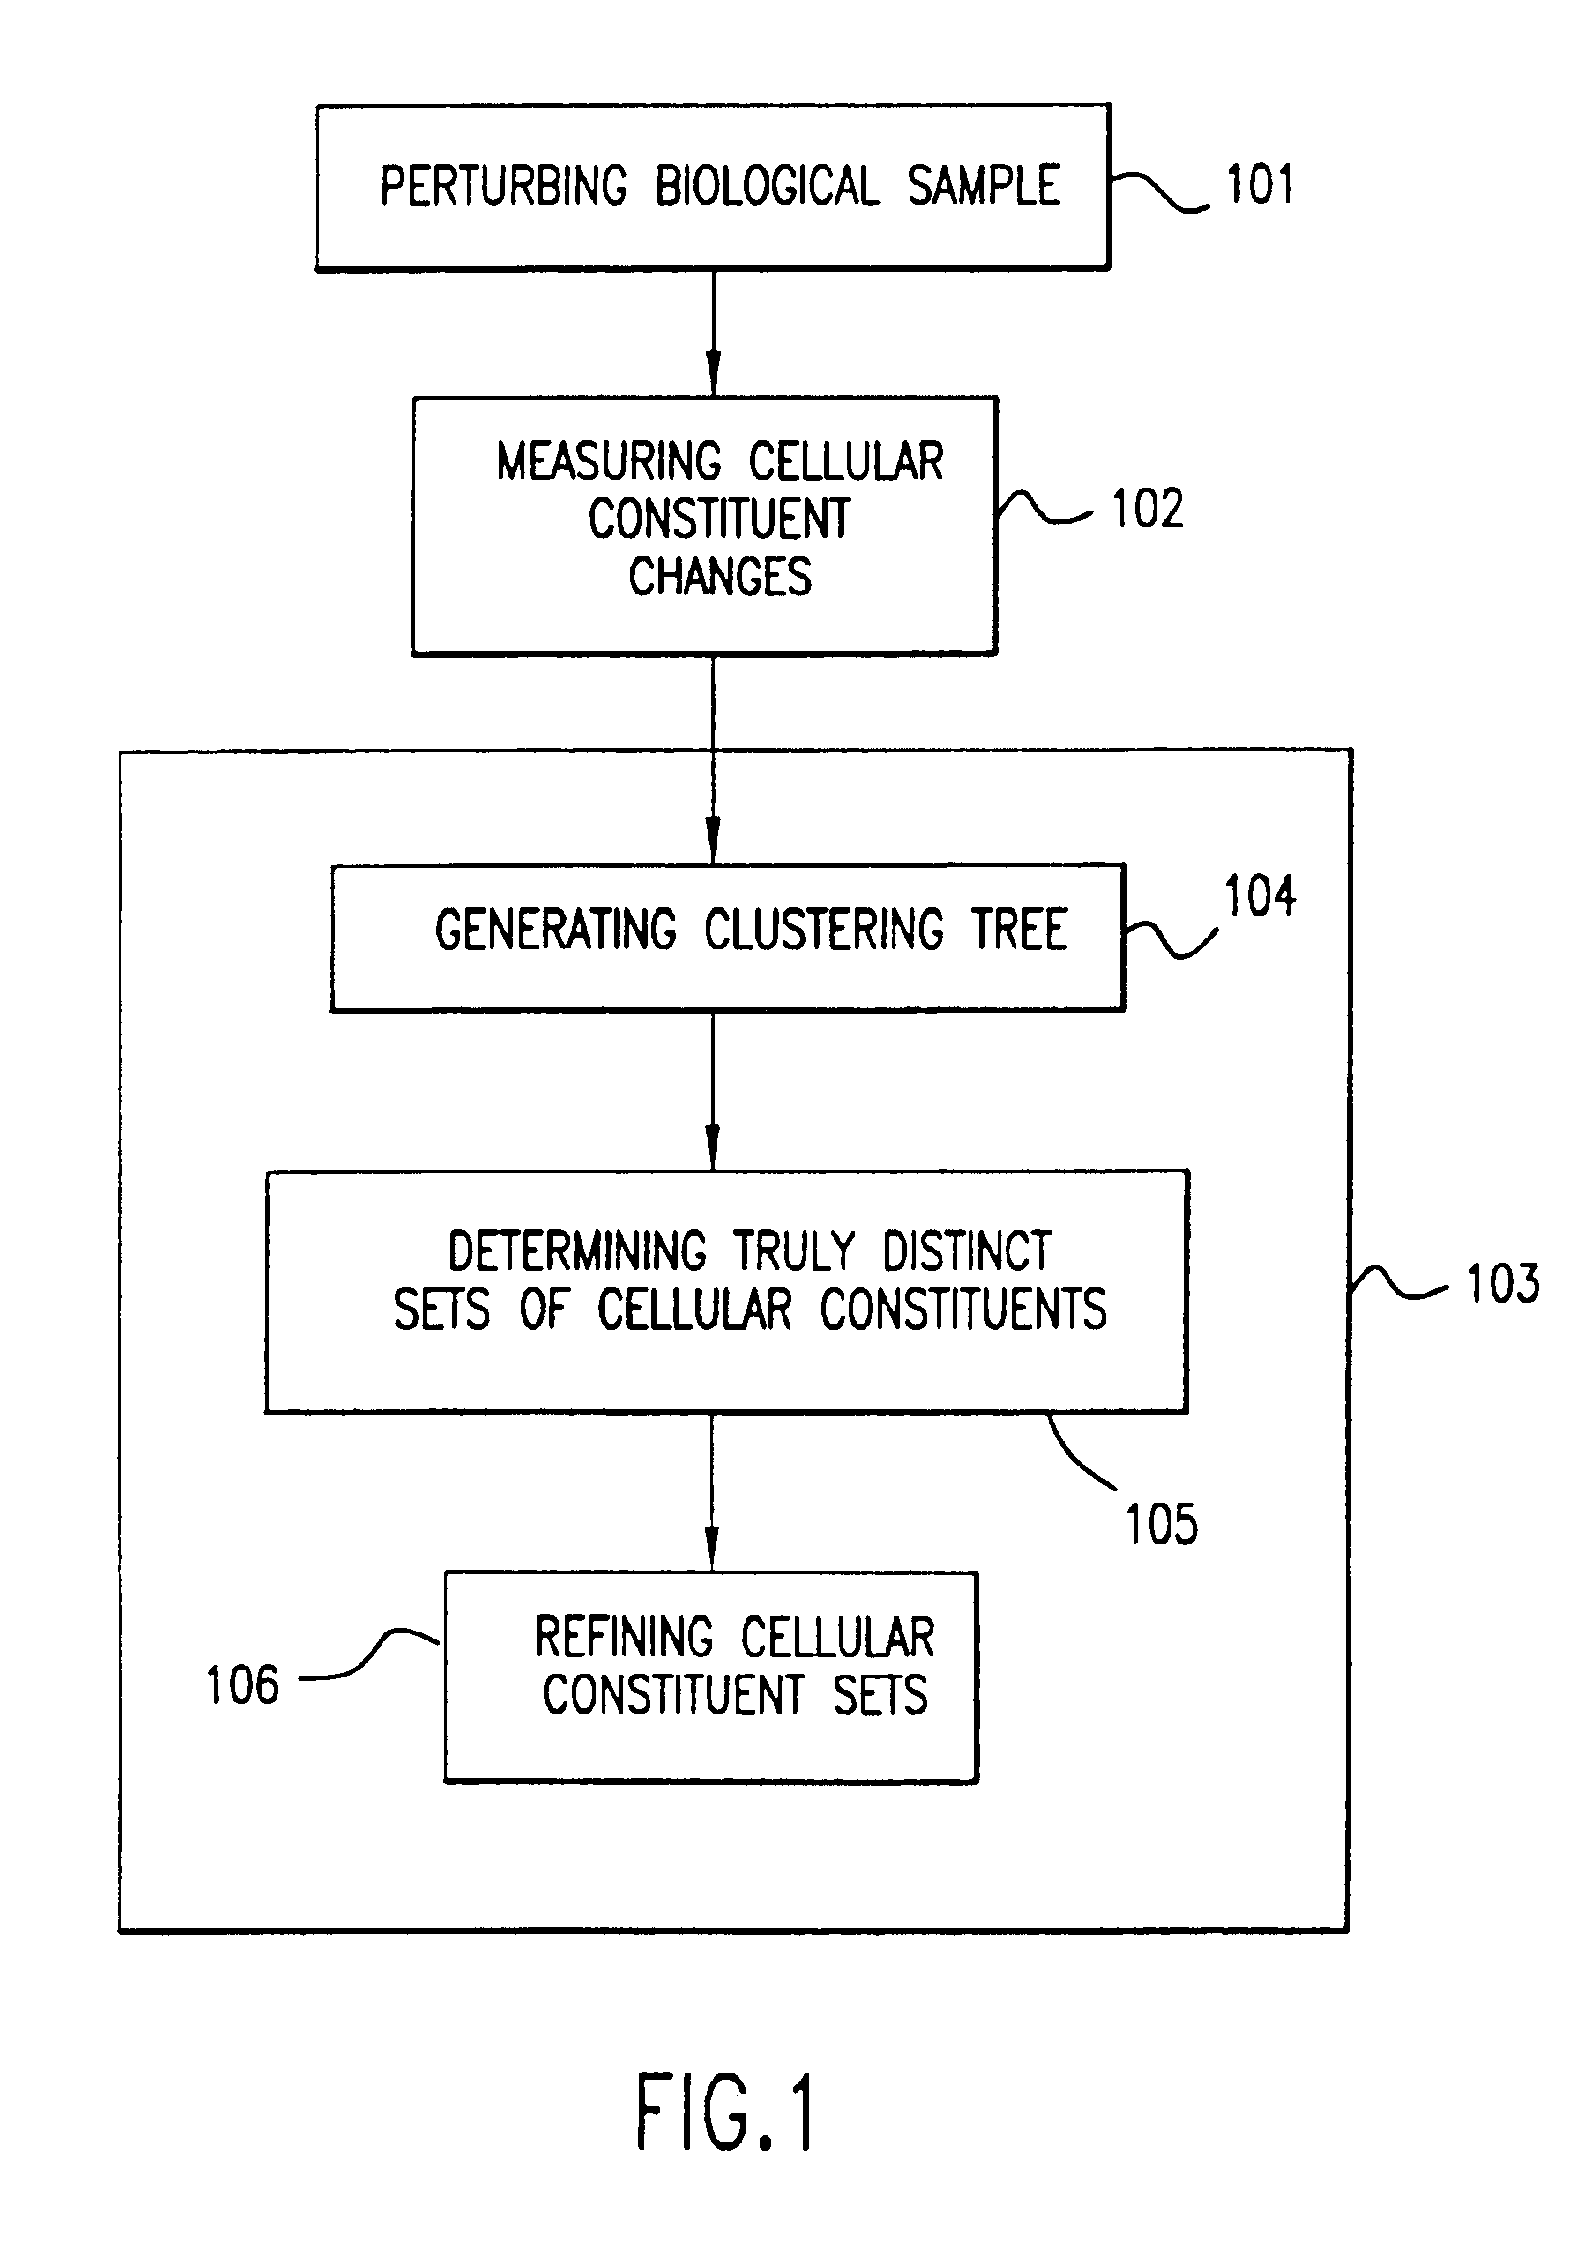 Methods for removing artifact from biological profiles